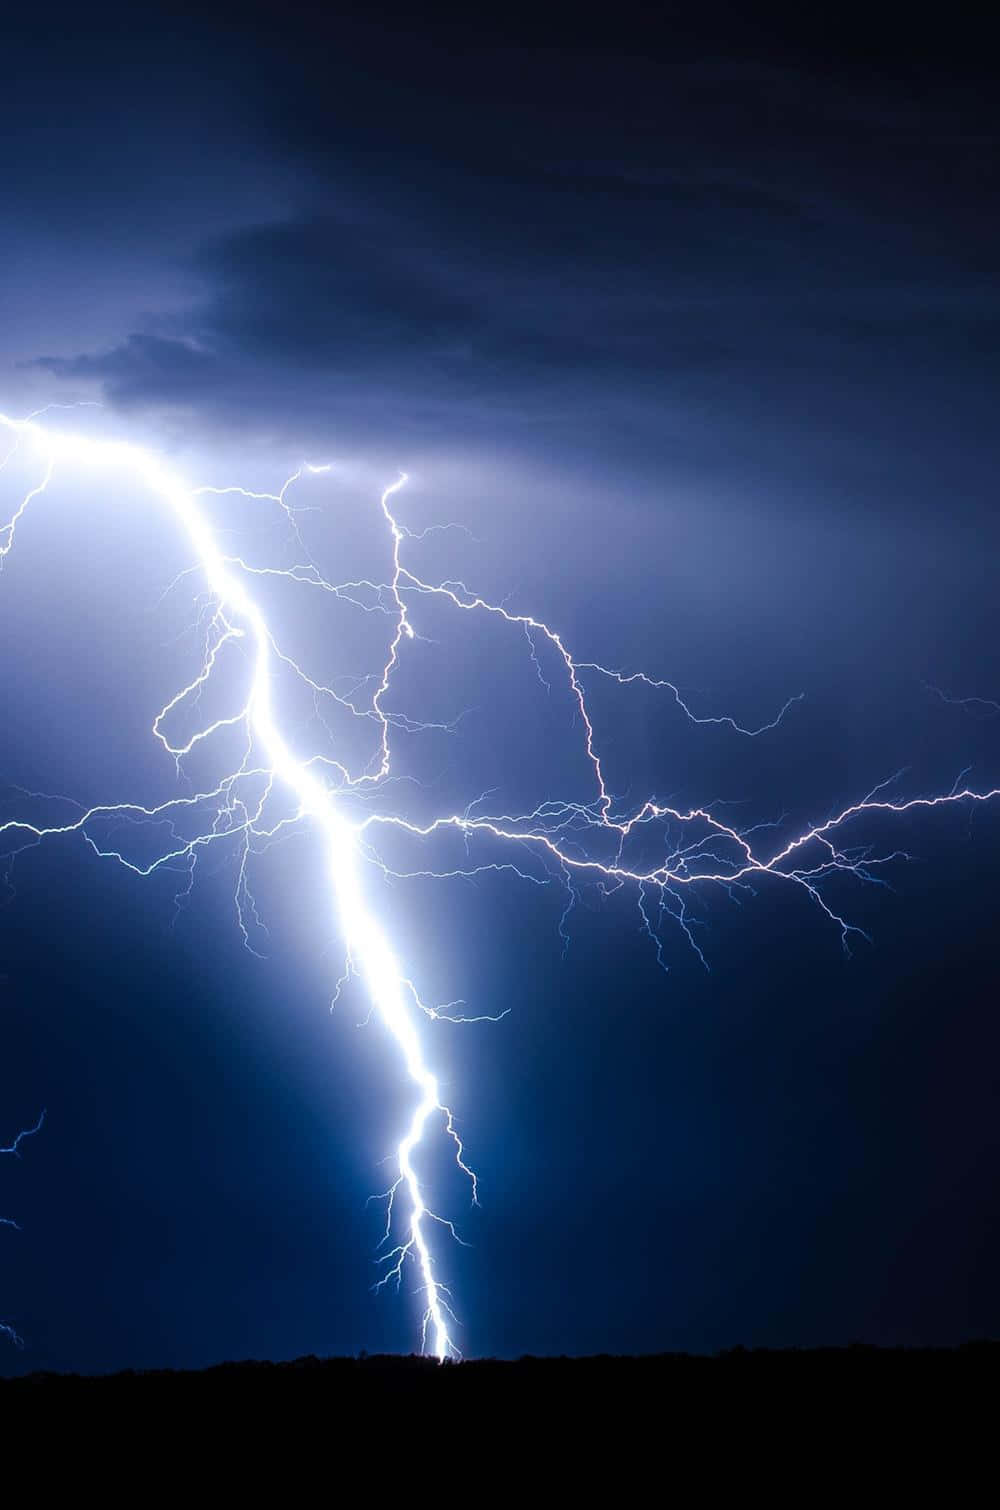 An Amazing Display Of Cool Lightning In The Sky Wallpaper